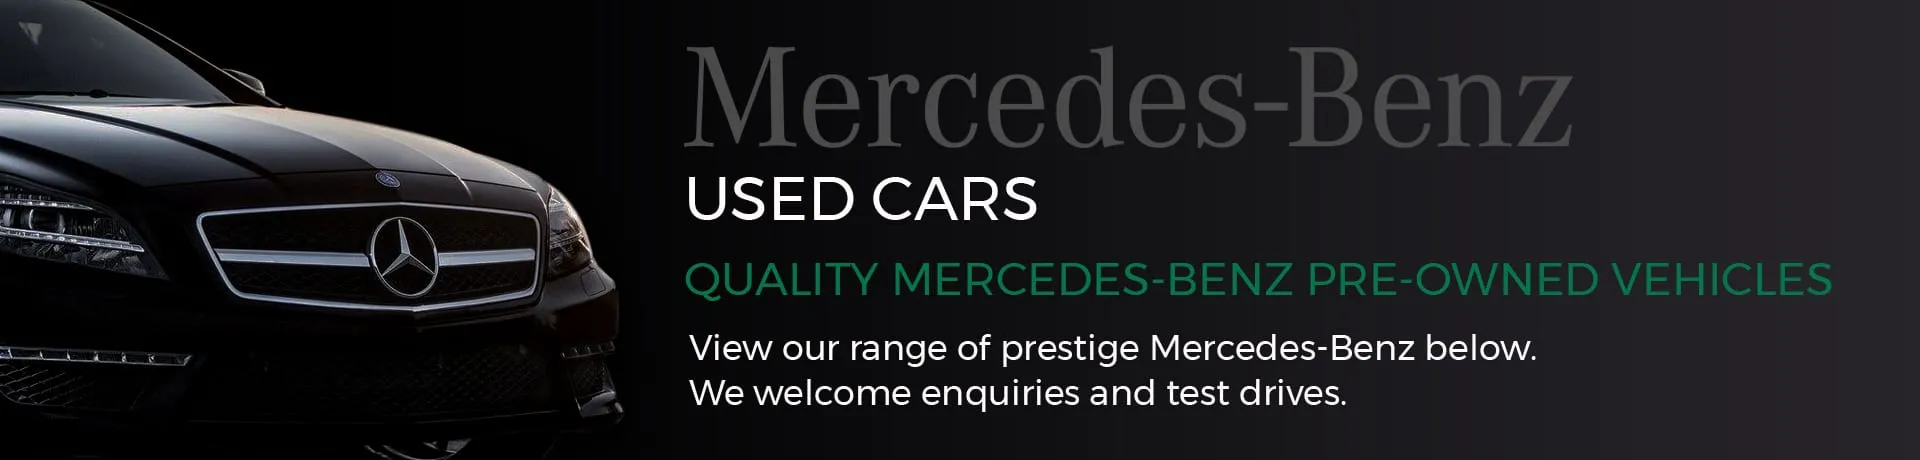 Mercedes-Benz used cars